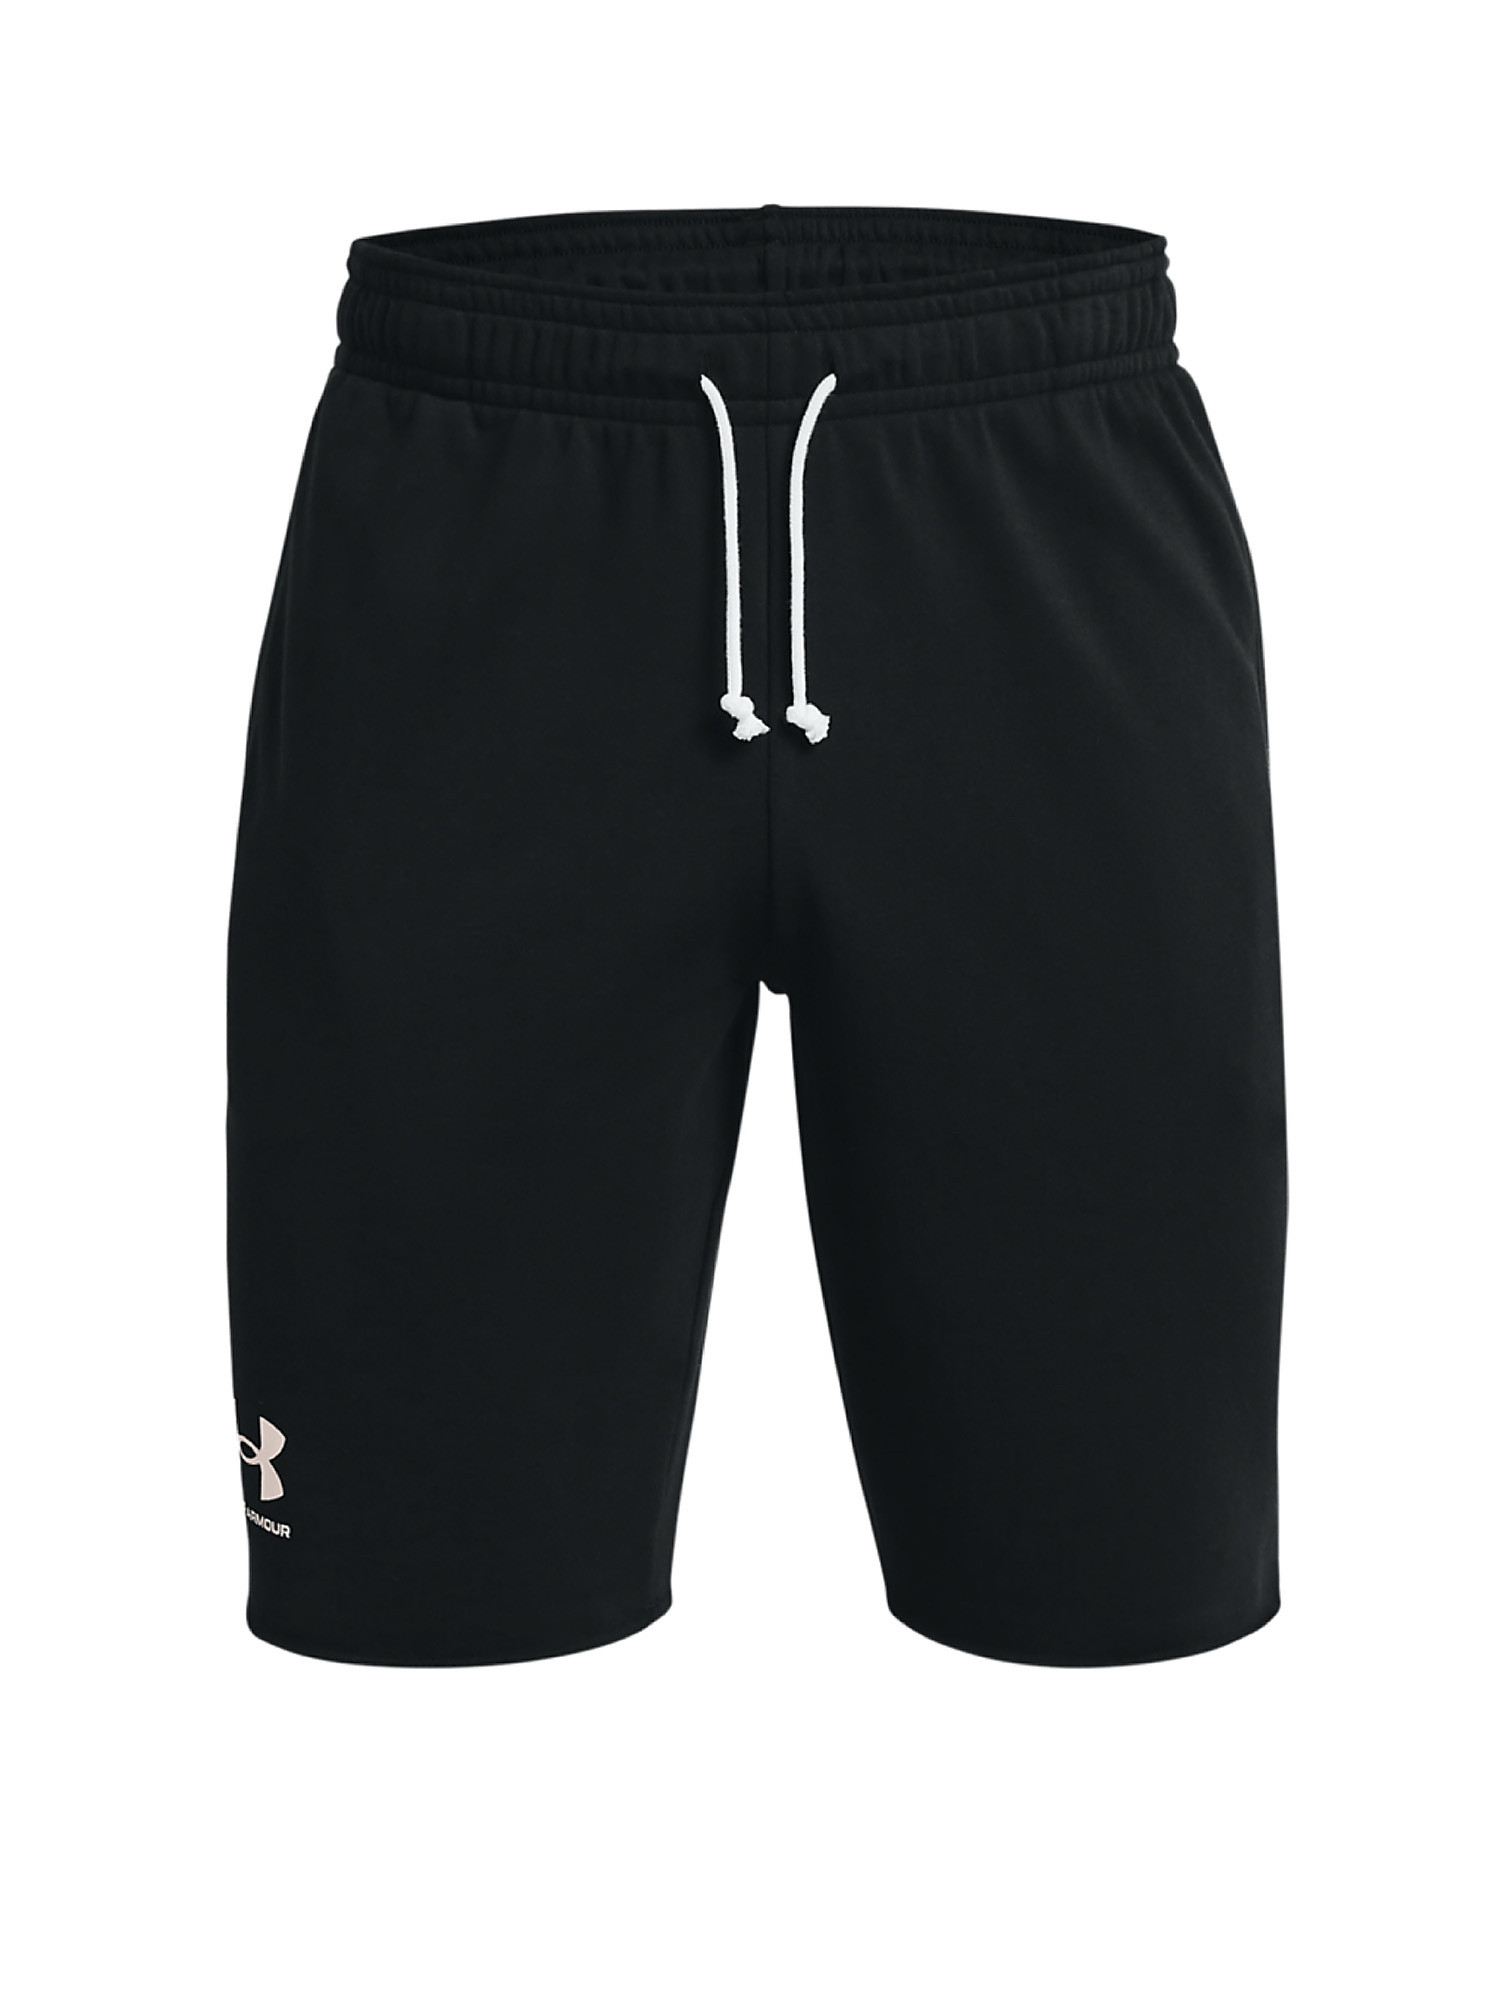 UA Rival Terry Shorts, Black, large image number 0